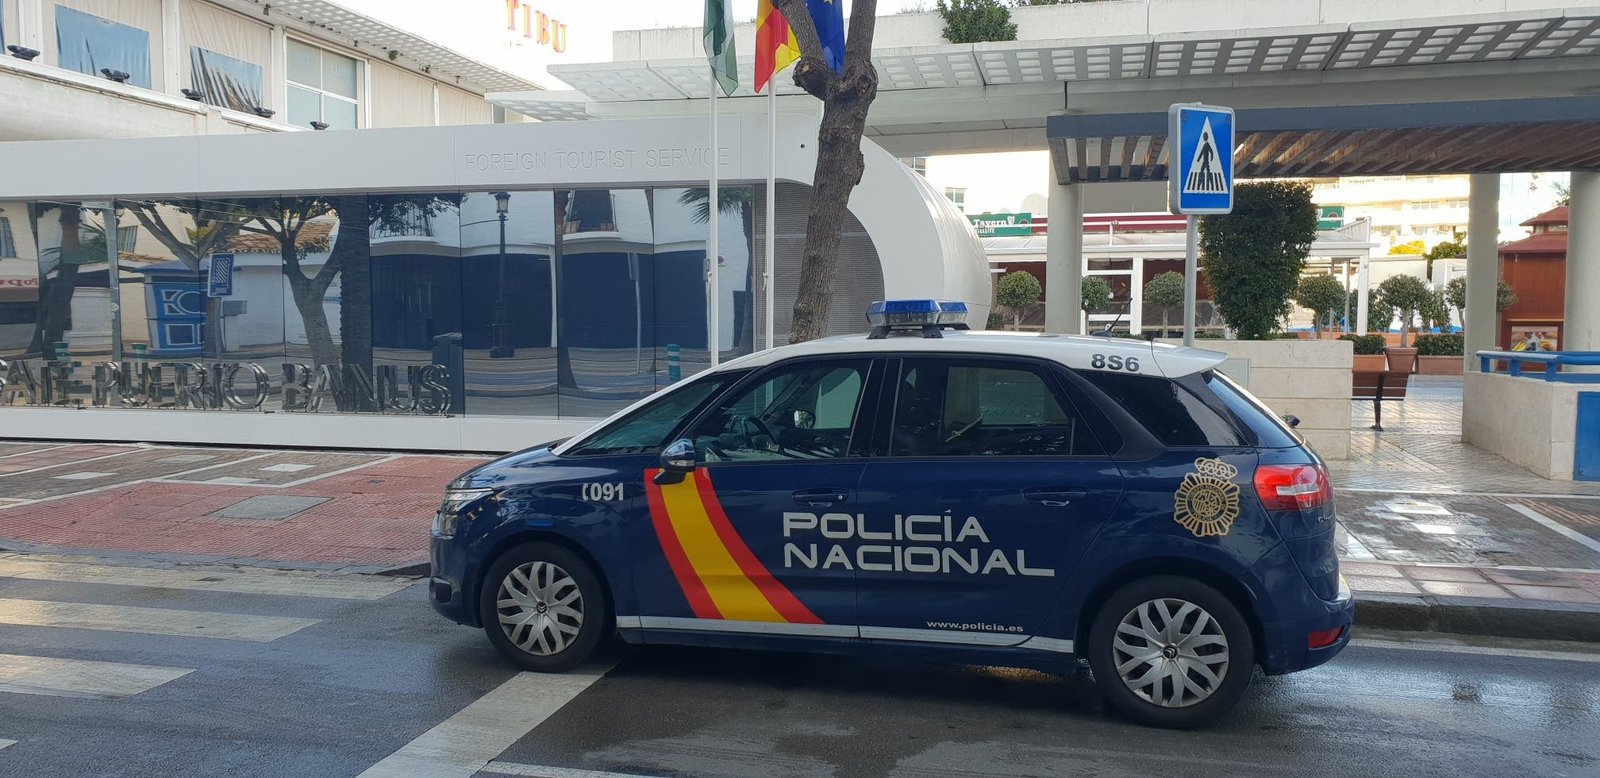 Breaking: Five Suspects Apprehended in Marbella for Alleged Group Assault on Young Woman - Shocking Details Inside - photo man stabbed in marbella in the neck - Local Events and Festivities -